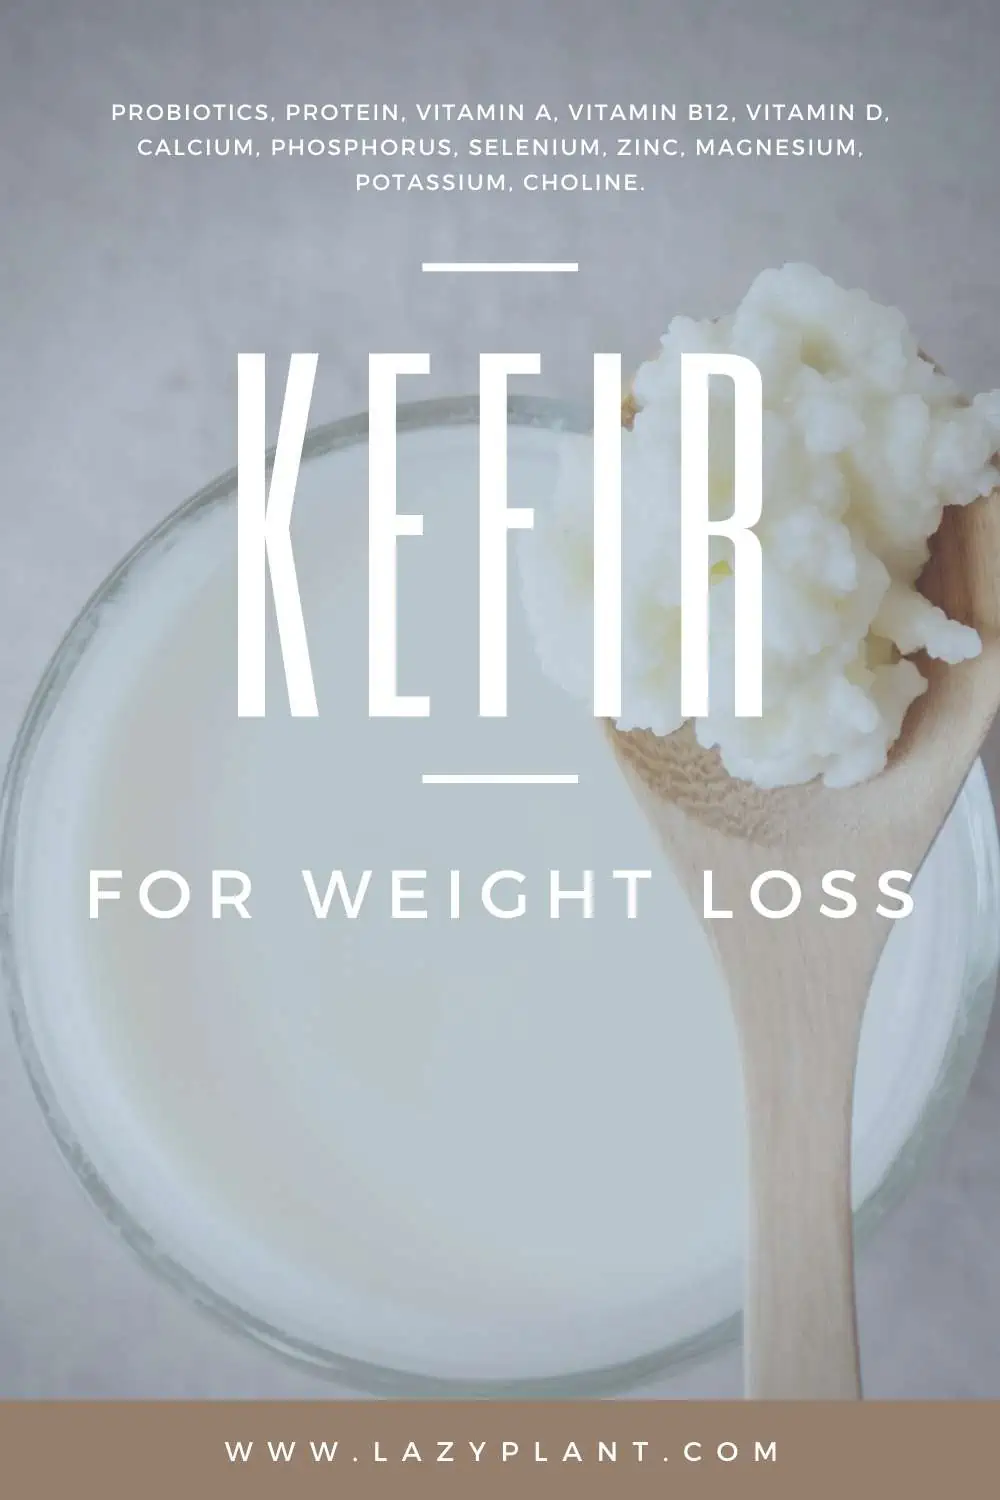 benefits of drinking kefir daily for weight loss.